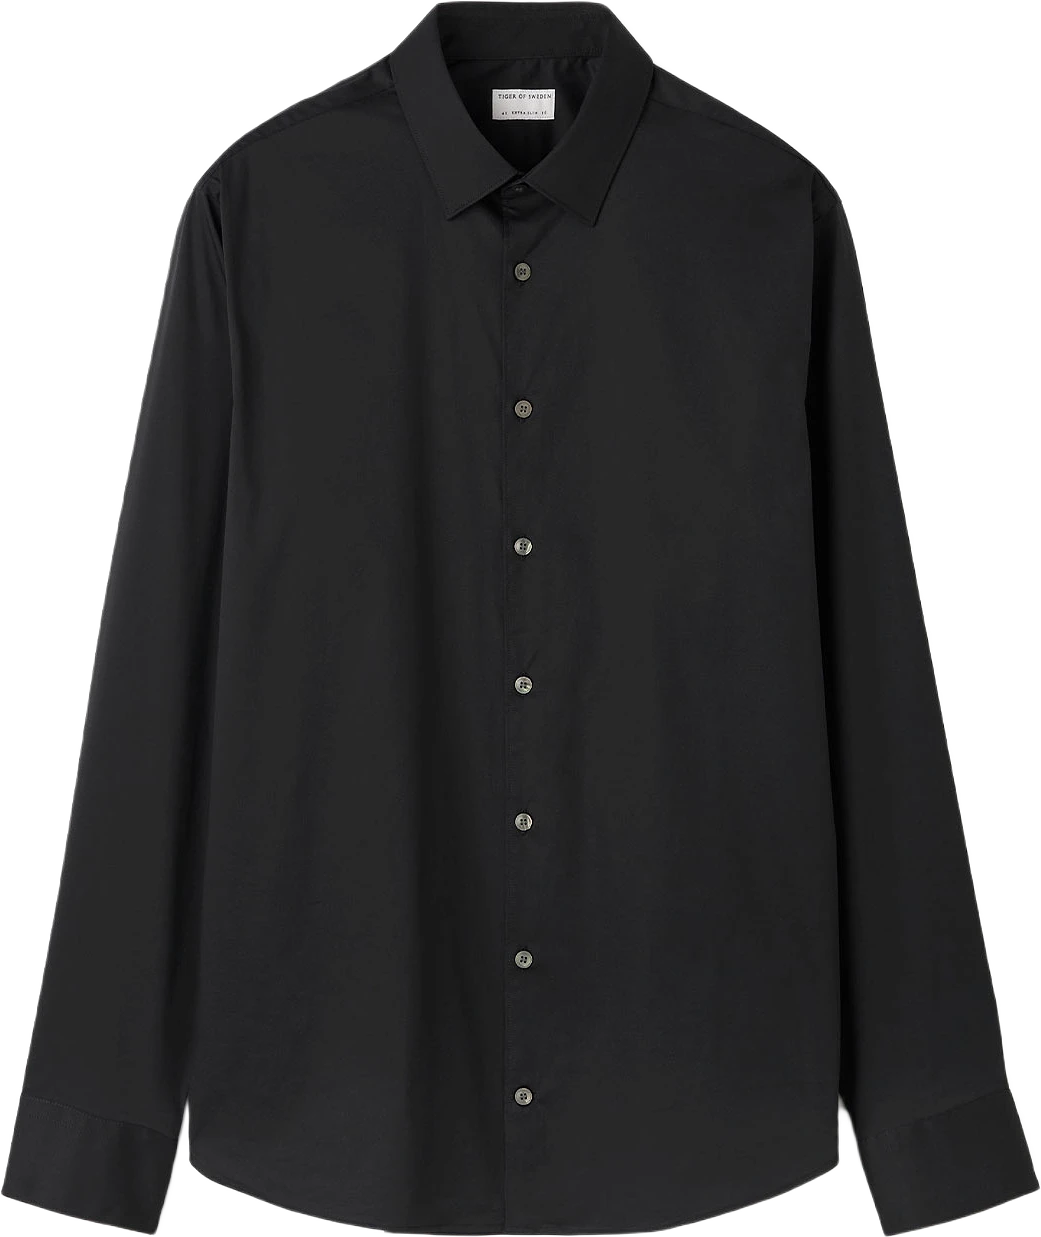 Filbrodie Shirt Stand-Up Collar